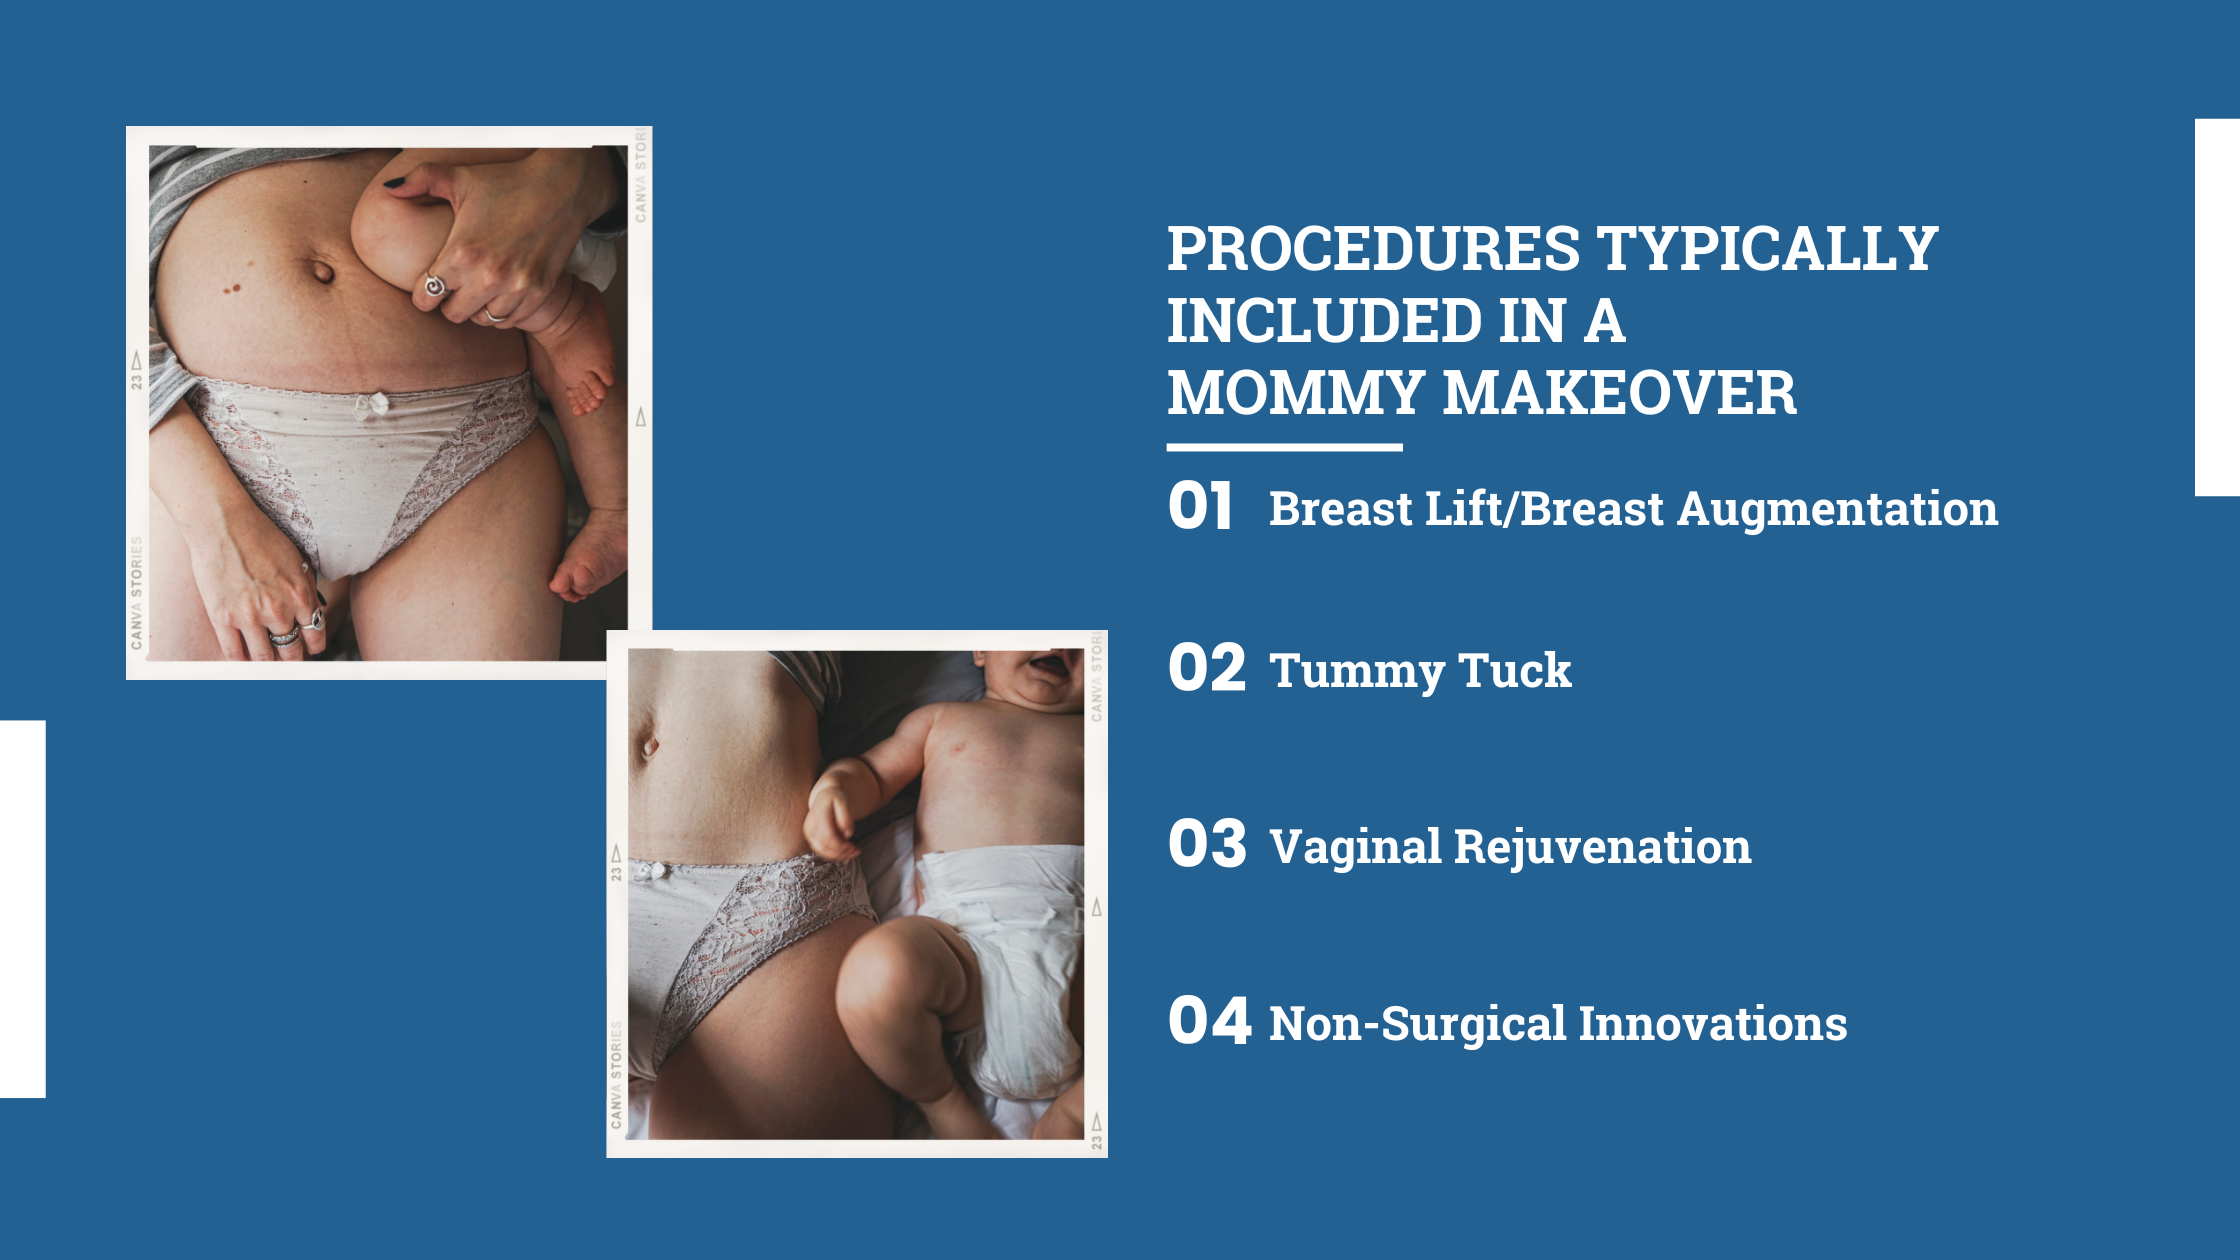 Procedures typically included in a mommy makeover